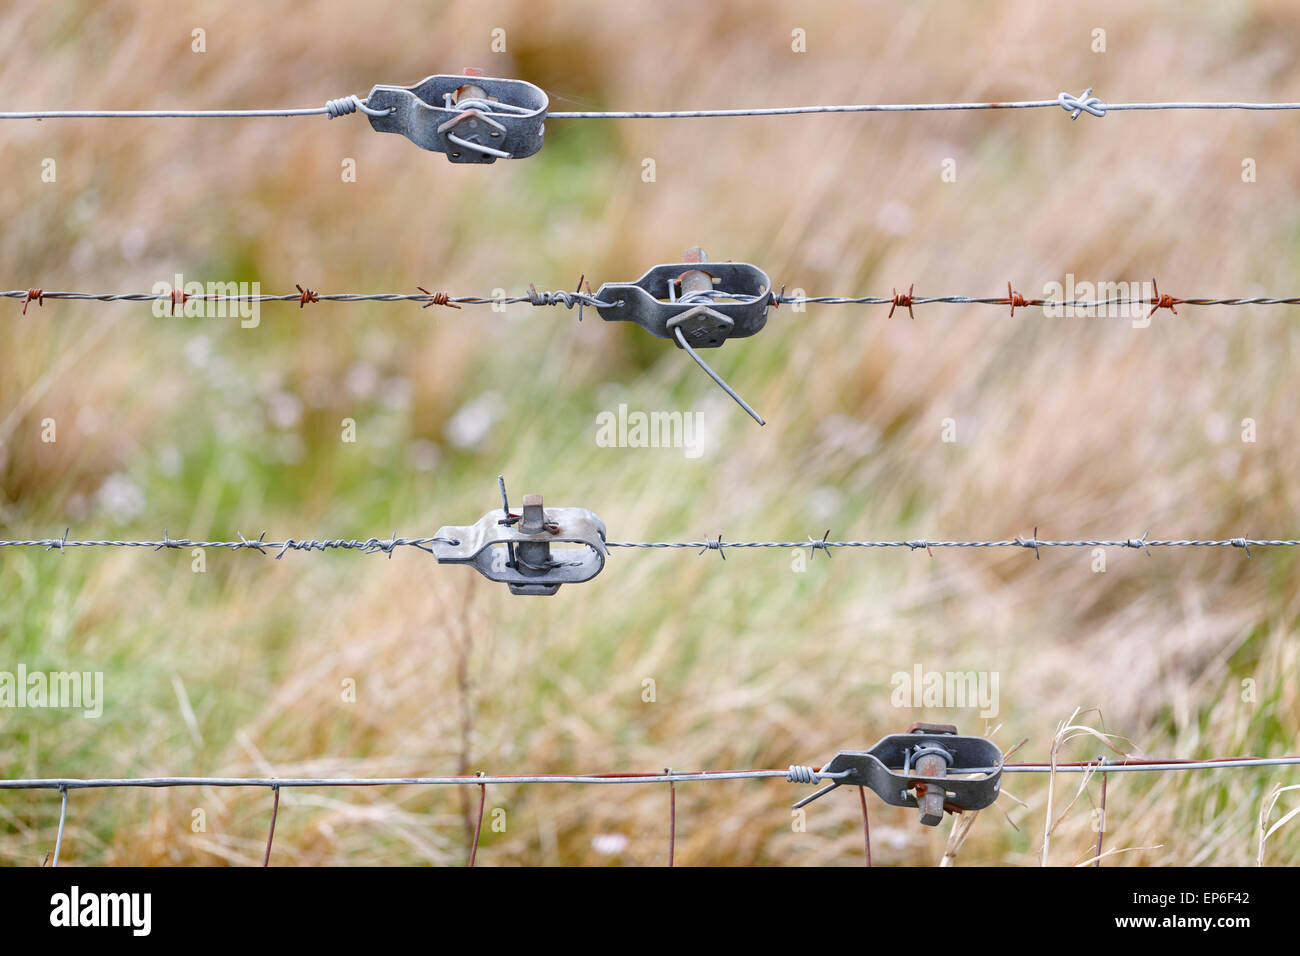 A barbed wire fence, UK Stock Photo